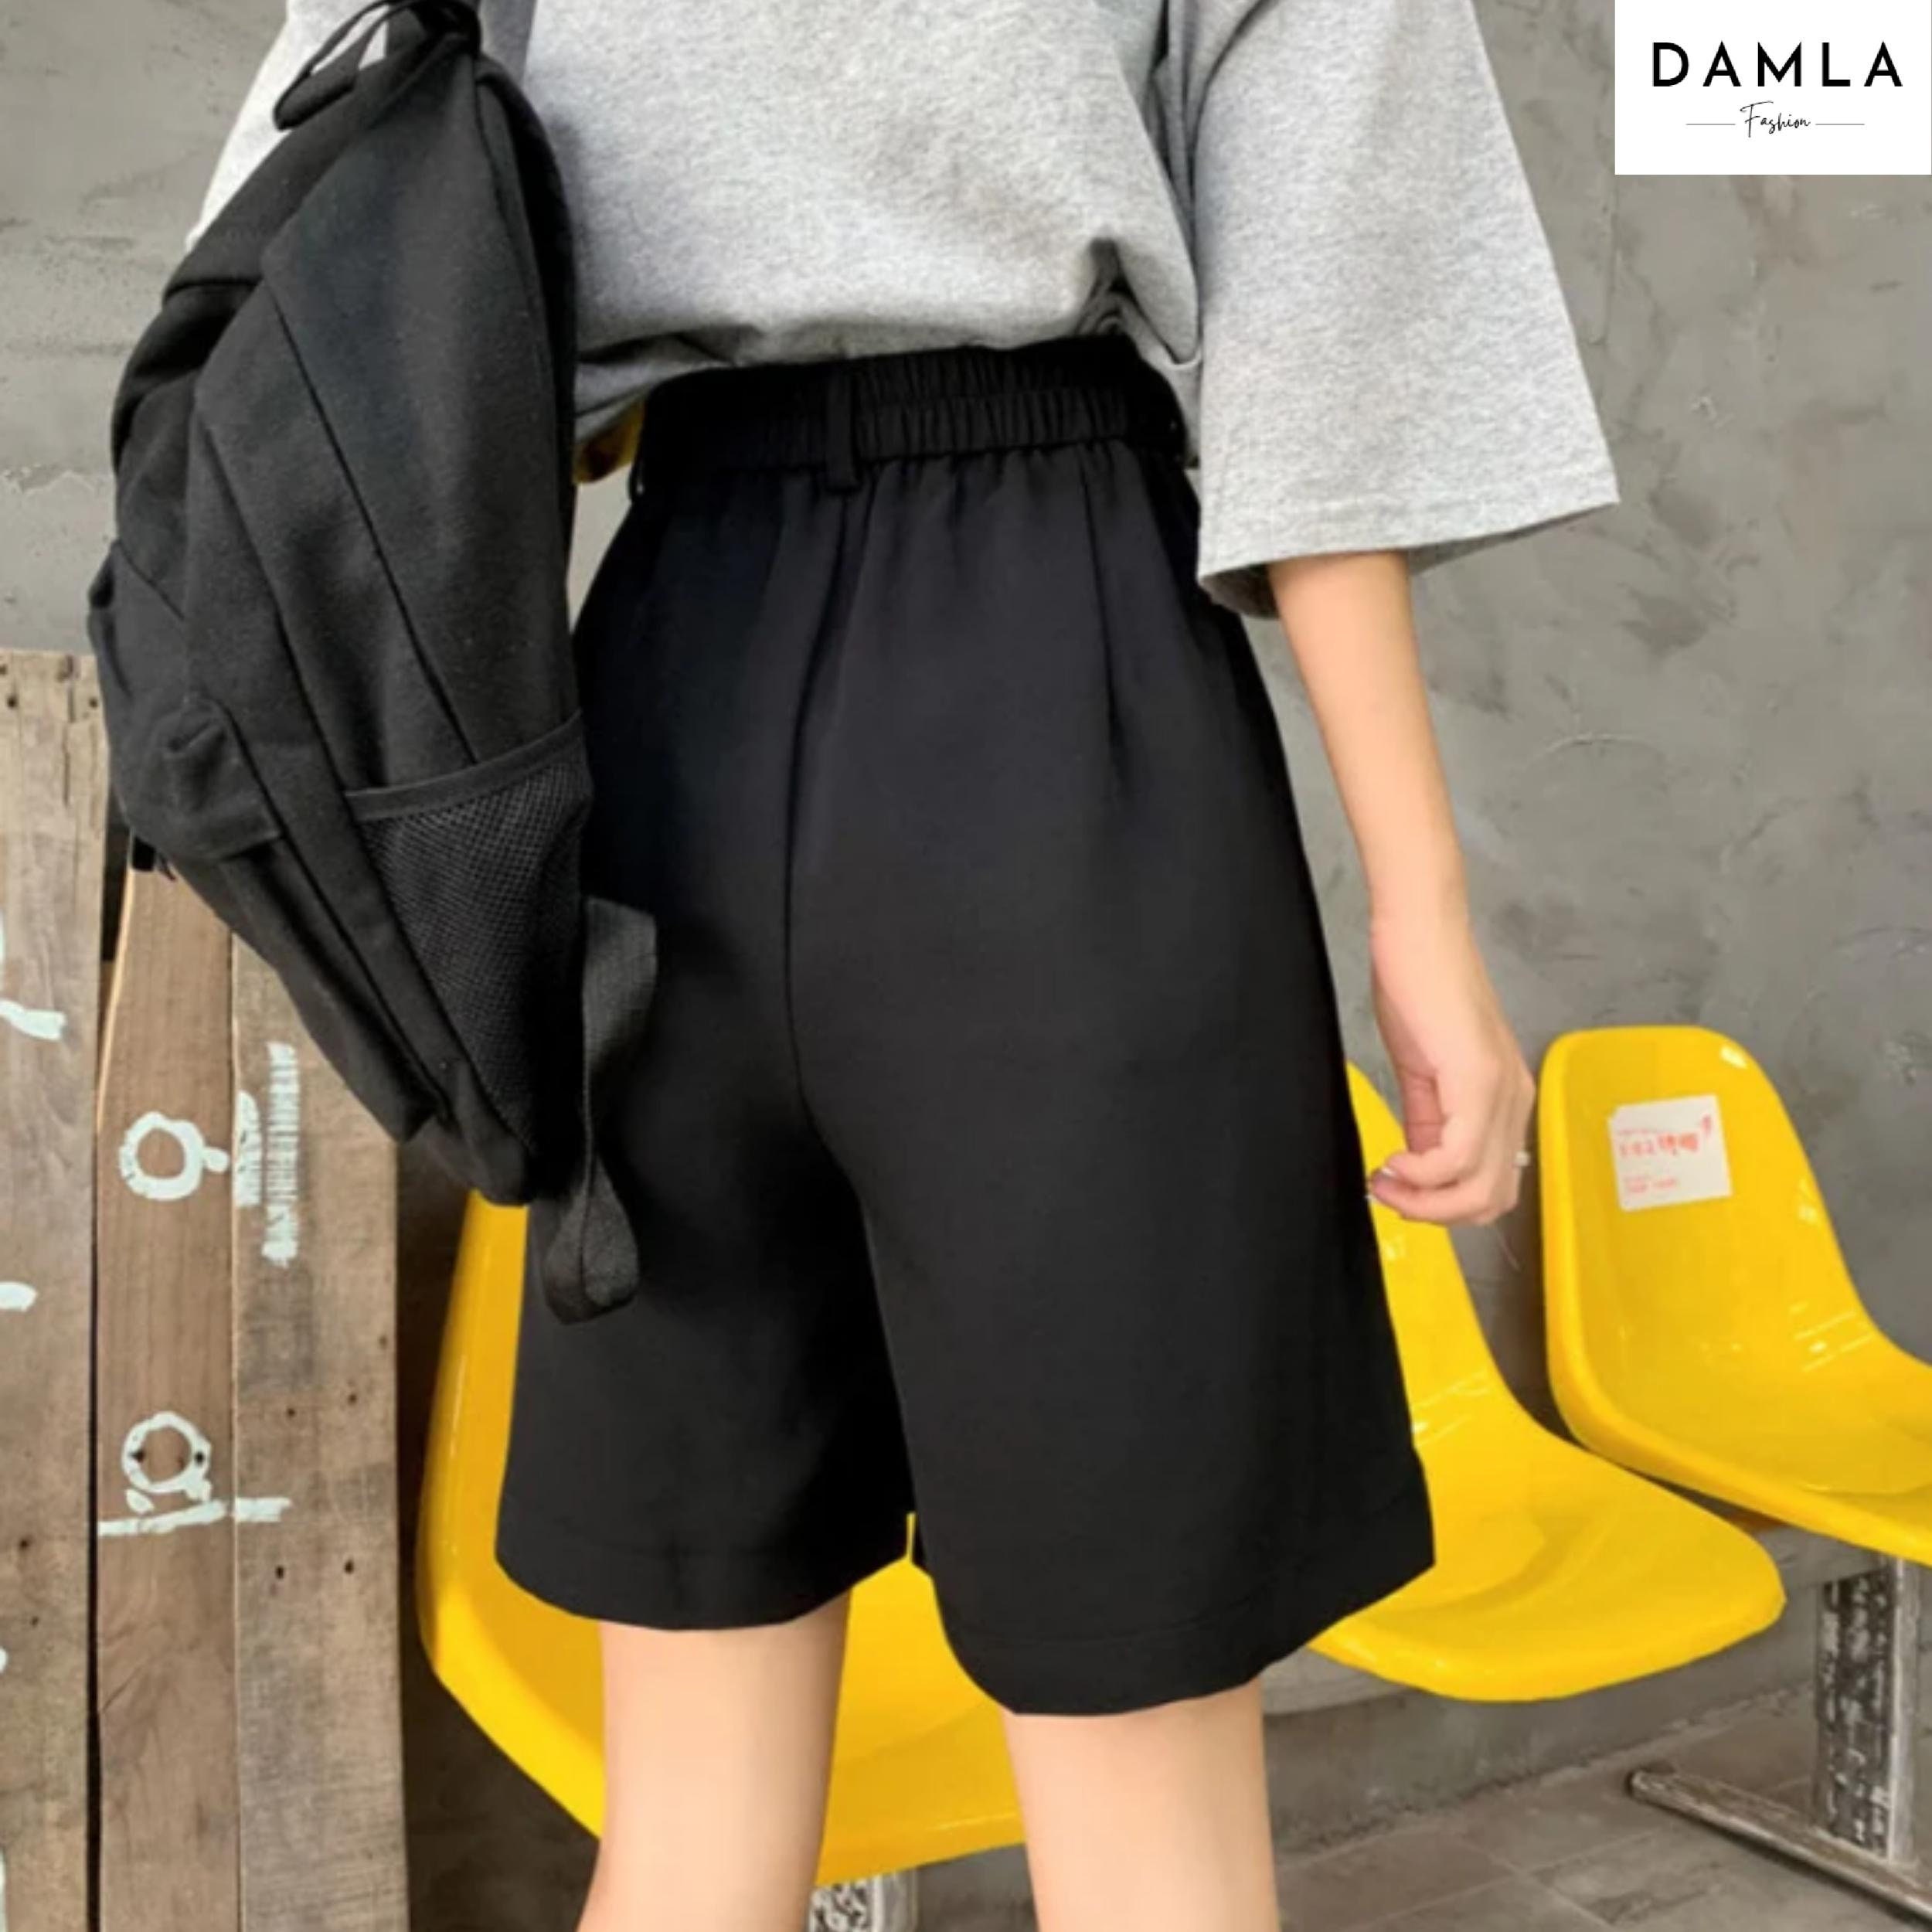 Vintage-inspired Solid Korean Shorts for Dark Academia Clothing, Plus Size Available